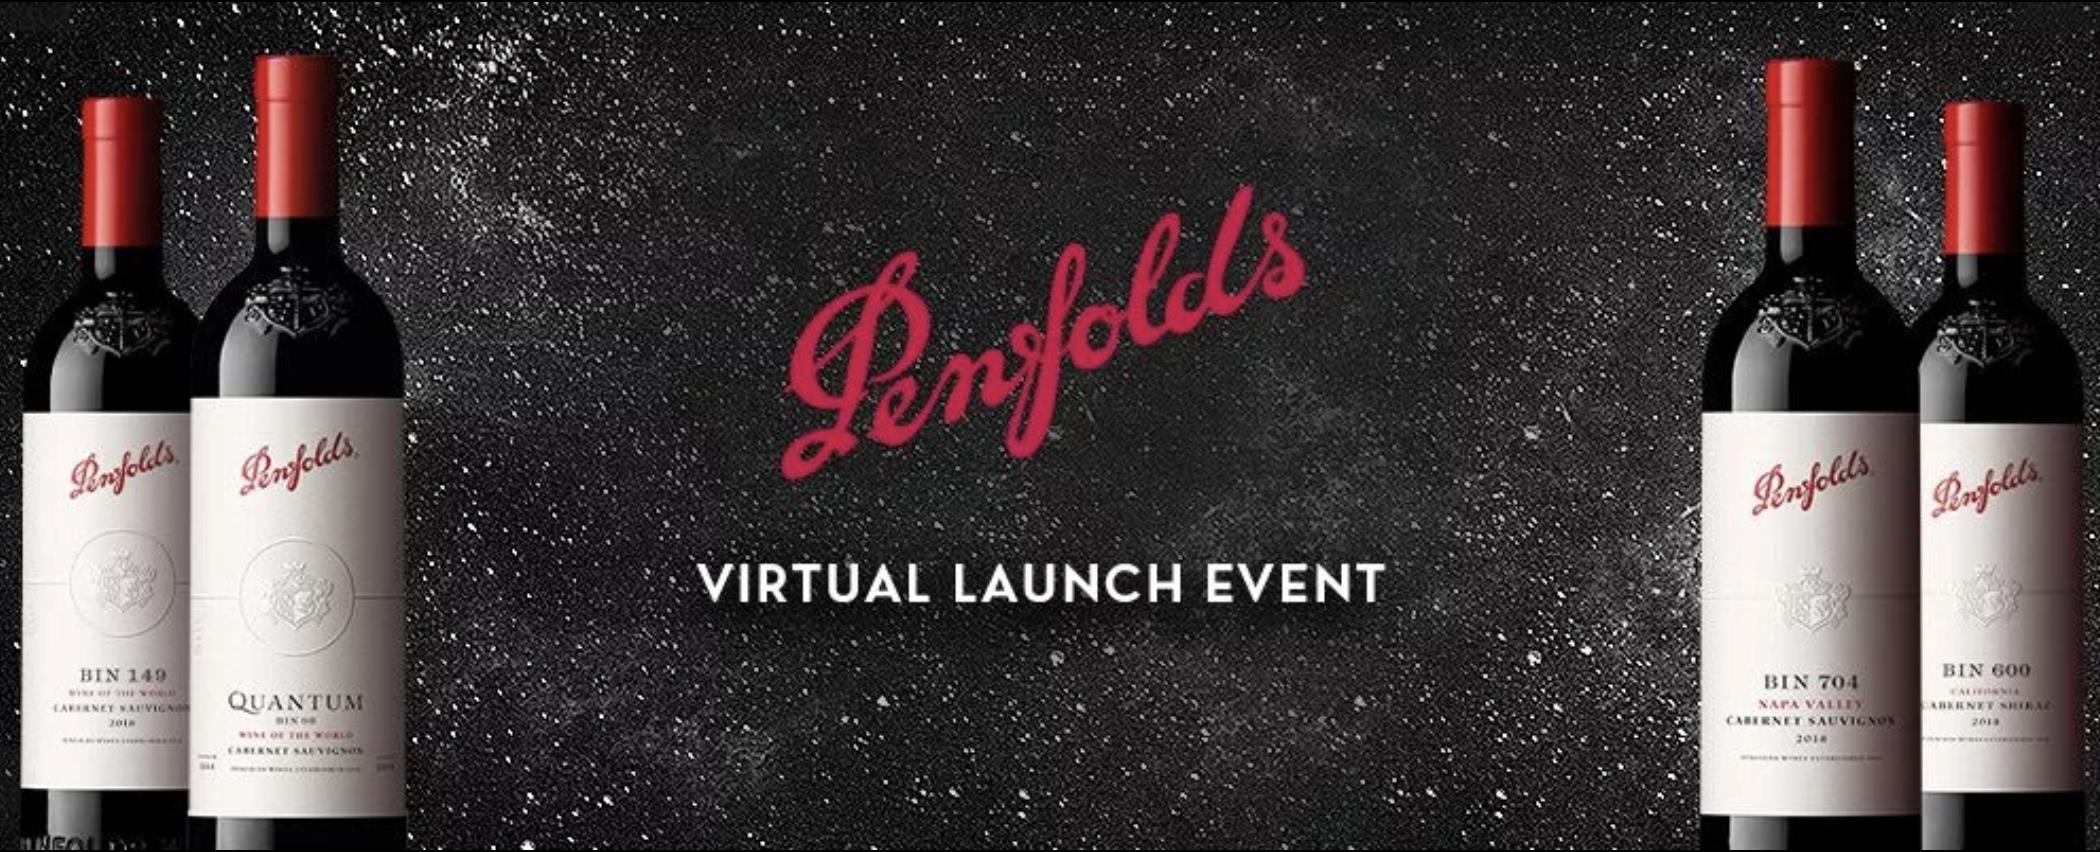 Penfolds - California Collection Virtual Launch